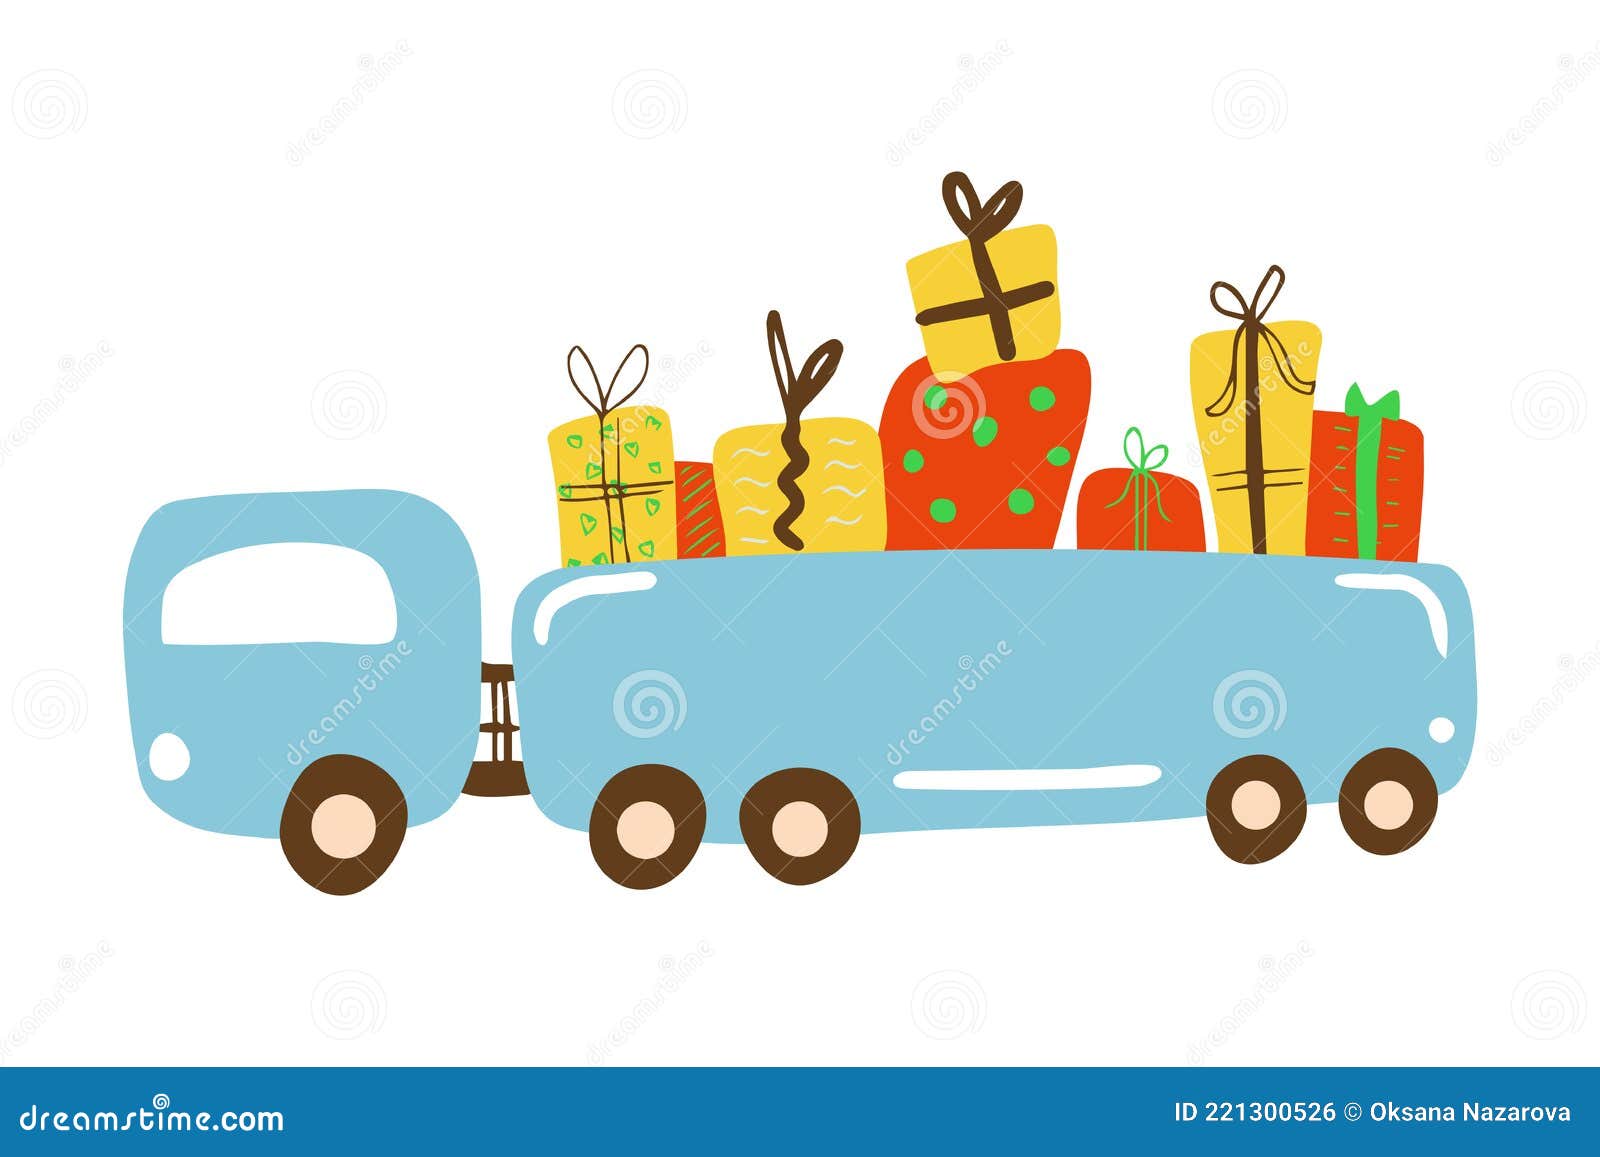 Truck full of gifts